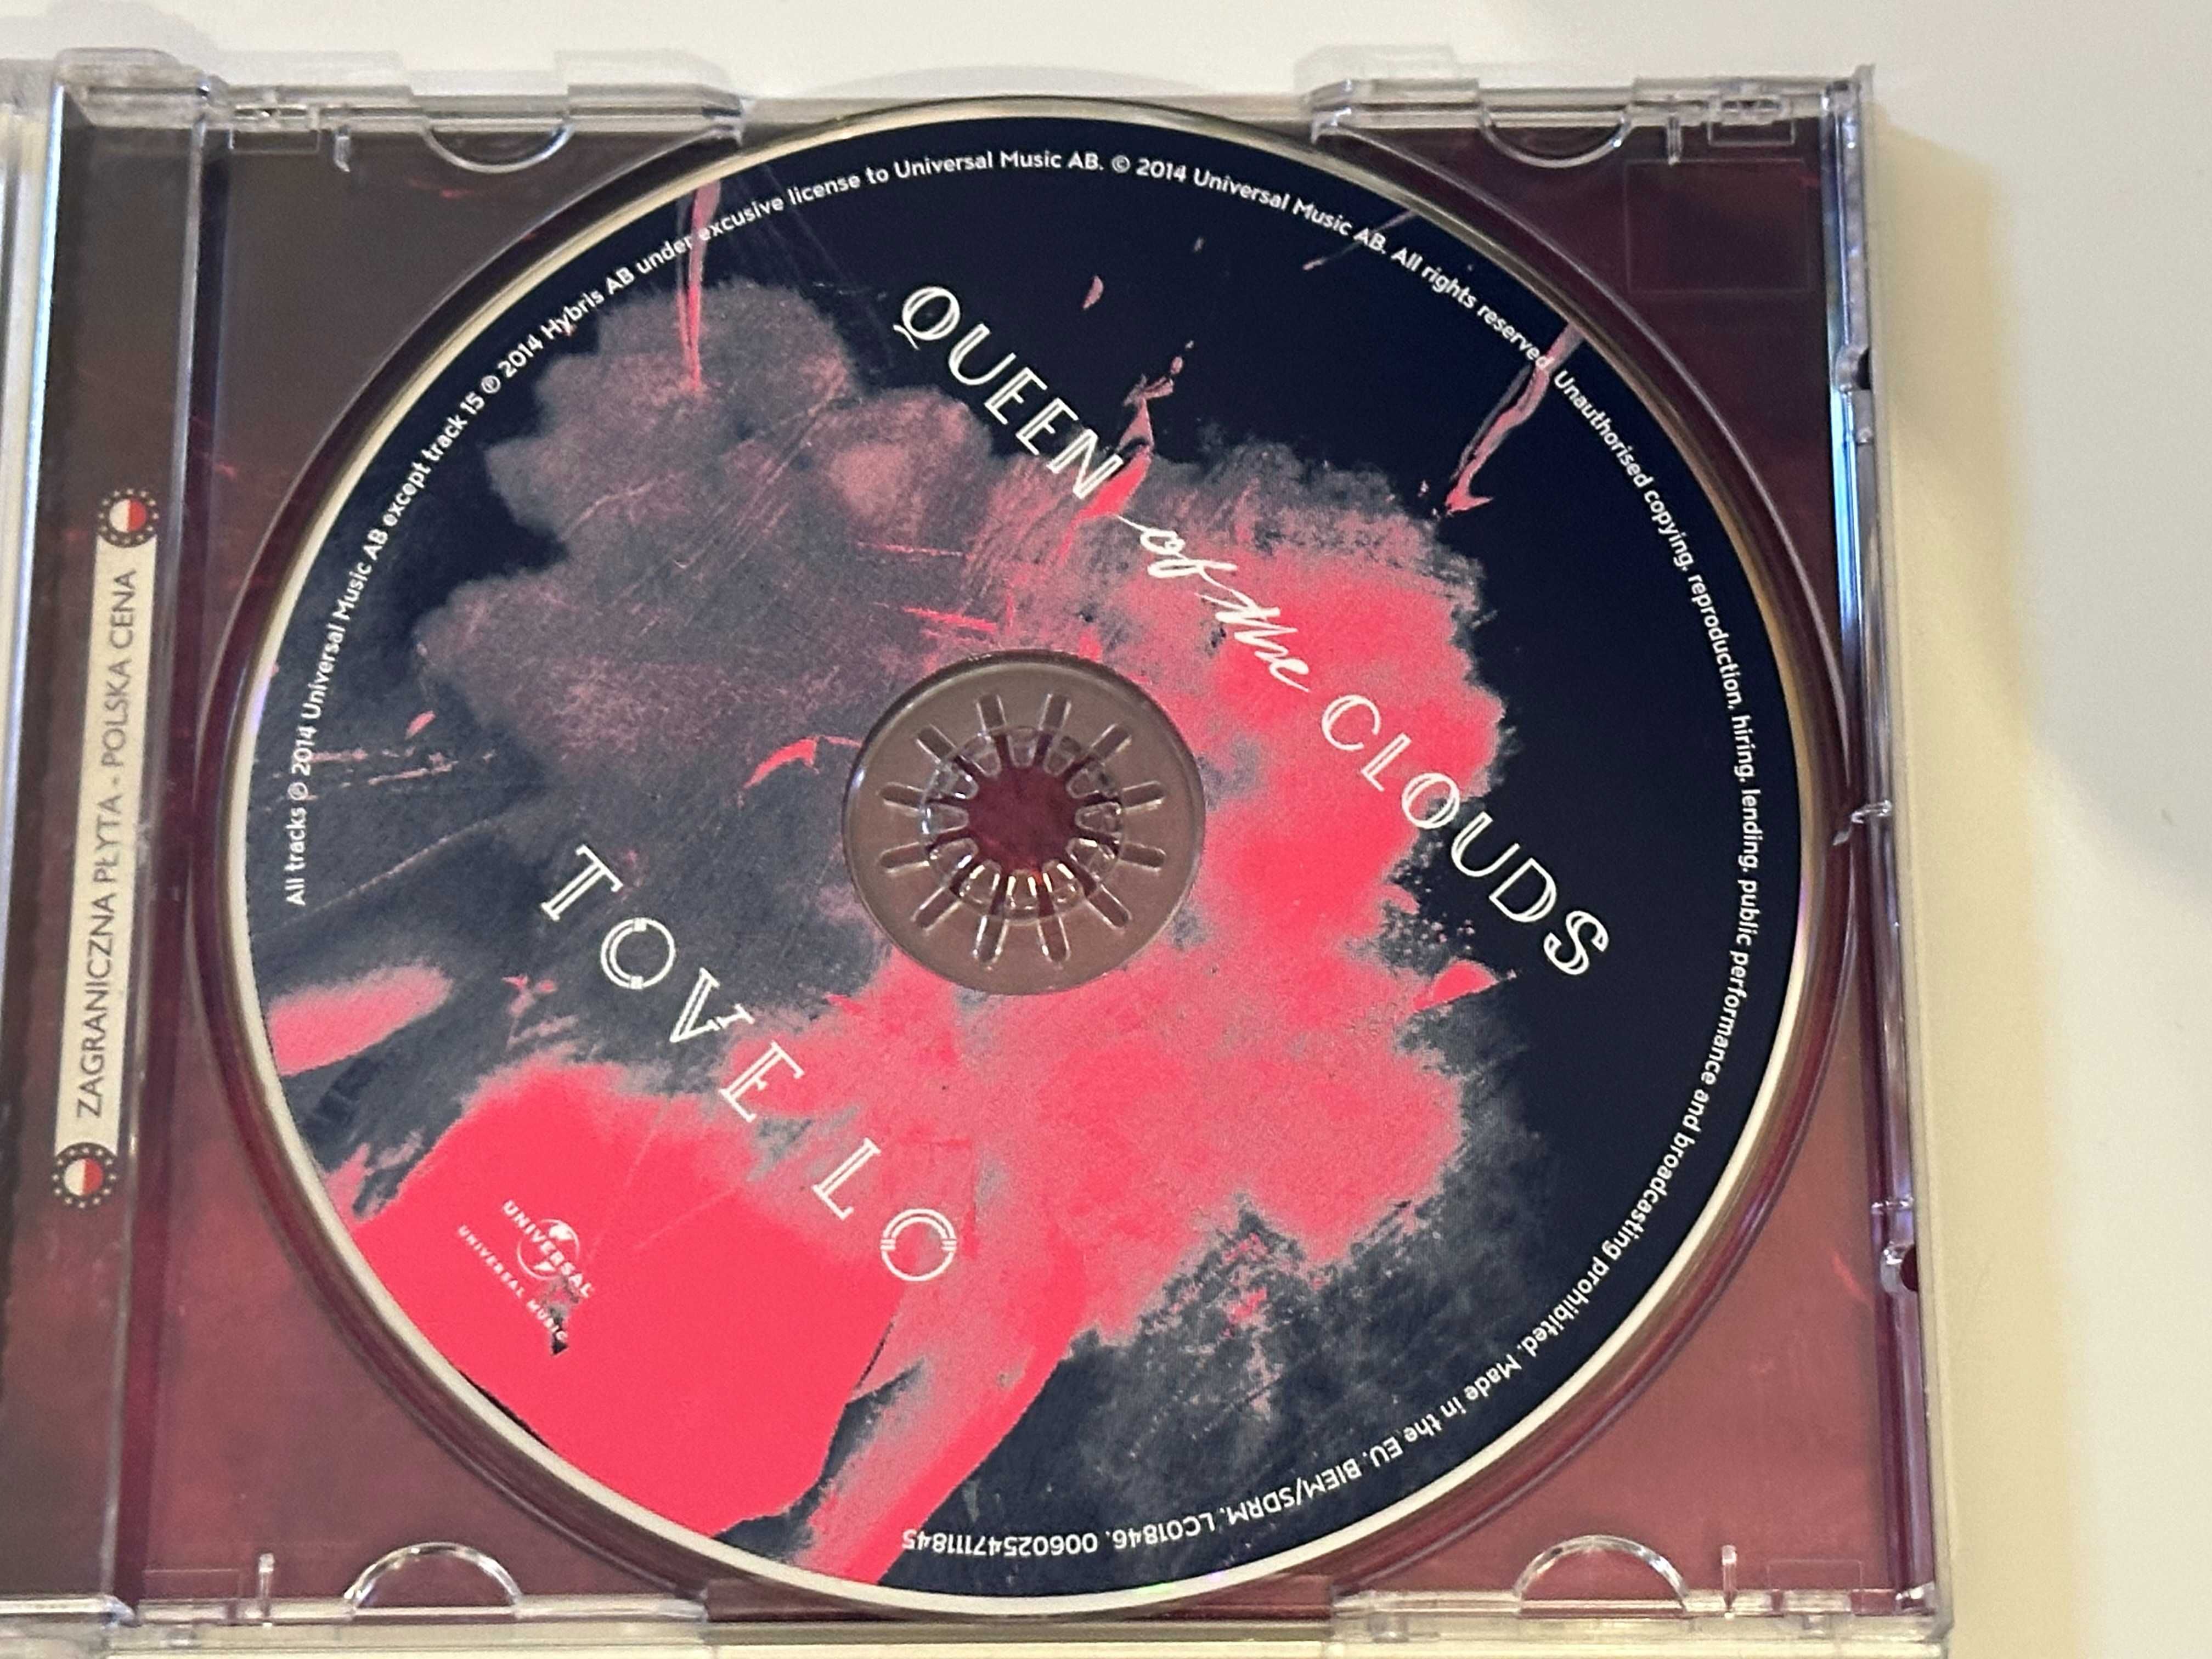 Tove Lo - Queen of the clouds CD